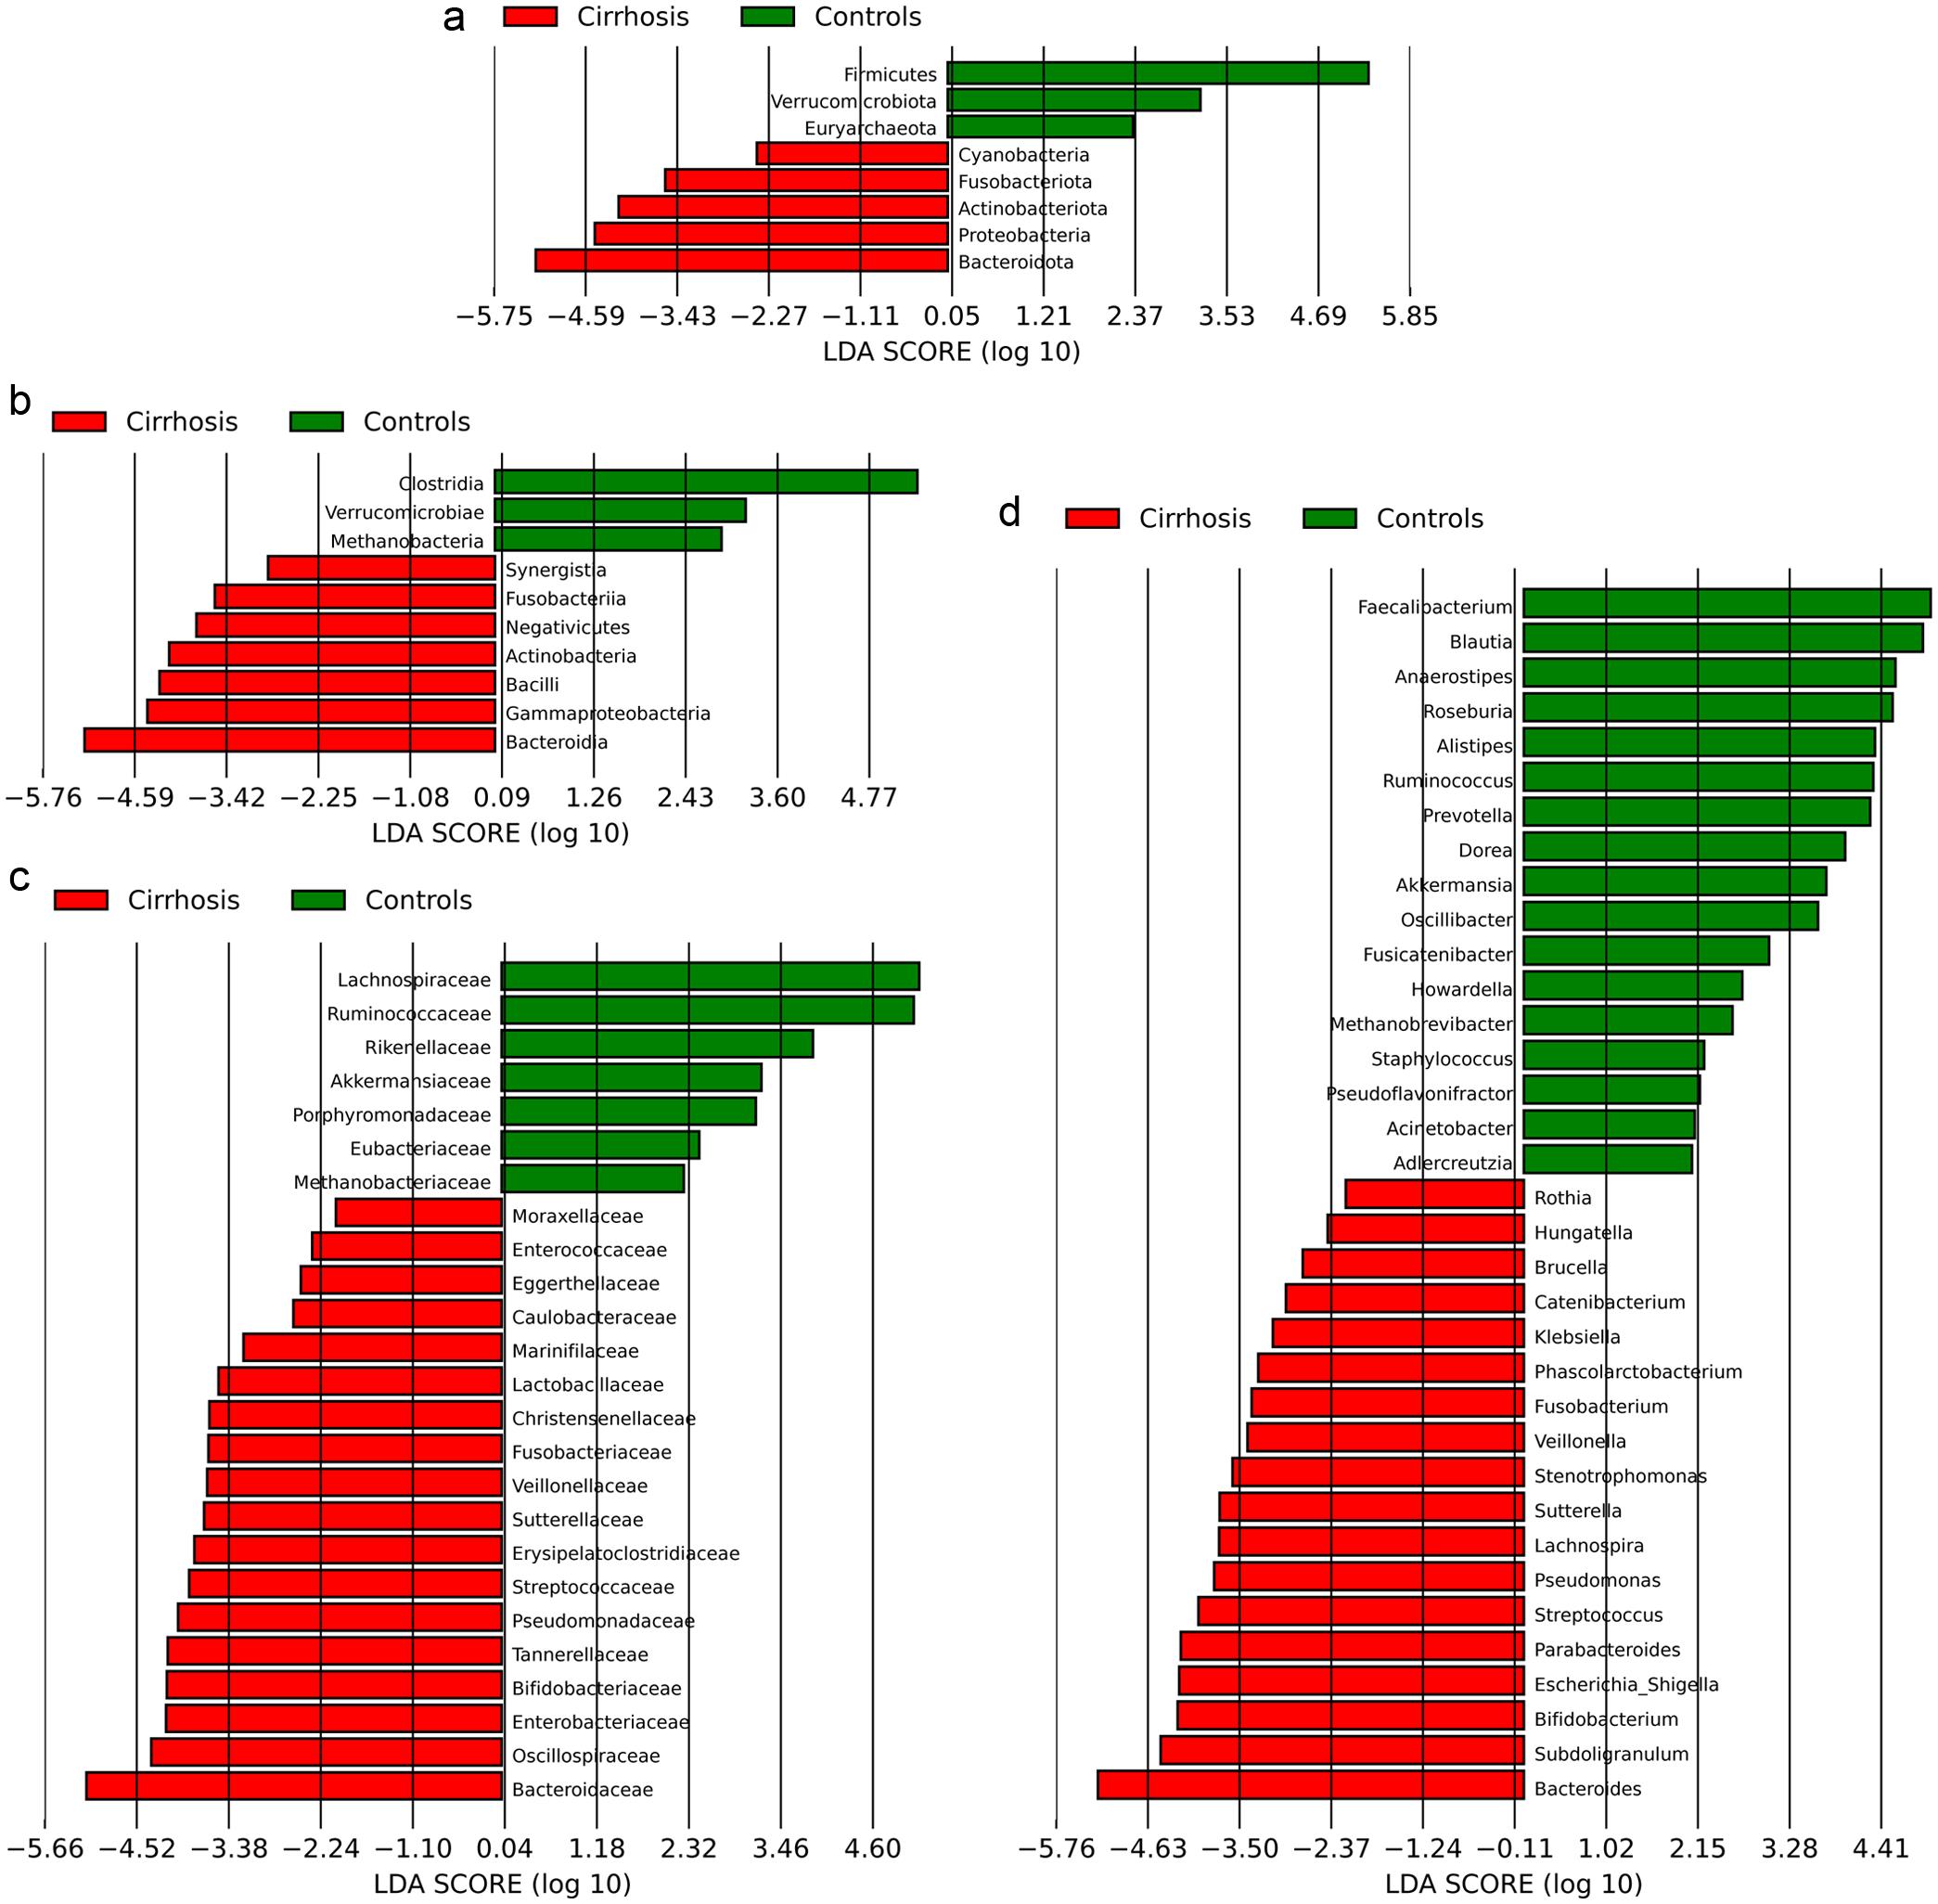 Comparison of the intestinal microbiota of patients with cirrhosis and healthy controls at the level of phyla (a), classes (b), families (c), and genera (d).